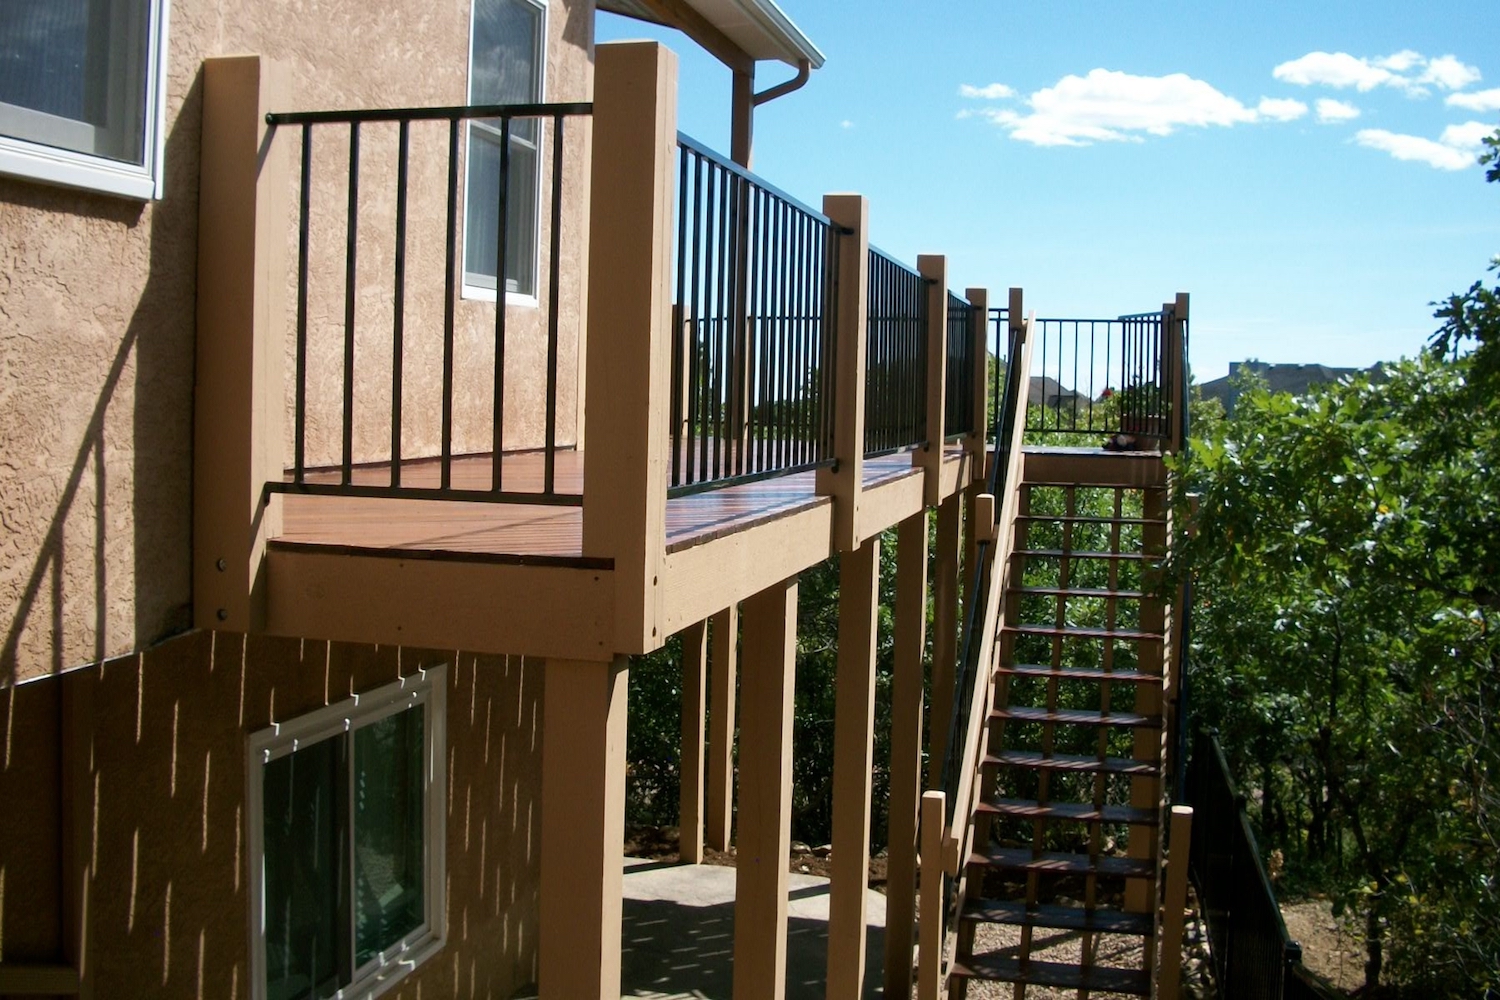 Custom hardwood deck that wraps around the side of the house with a staircase to ground level